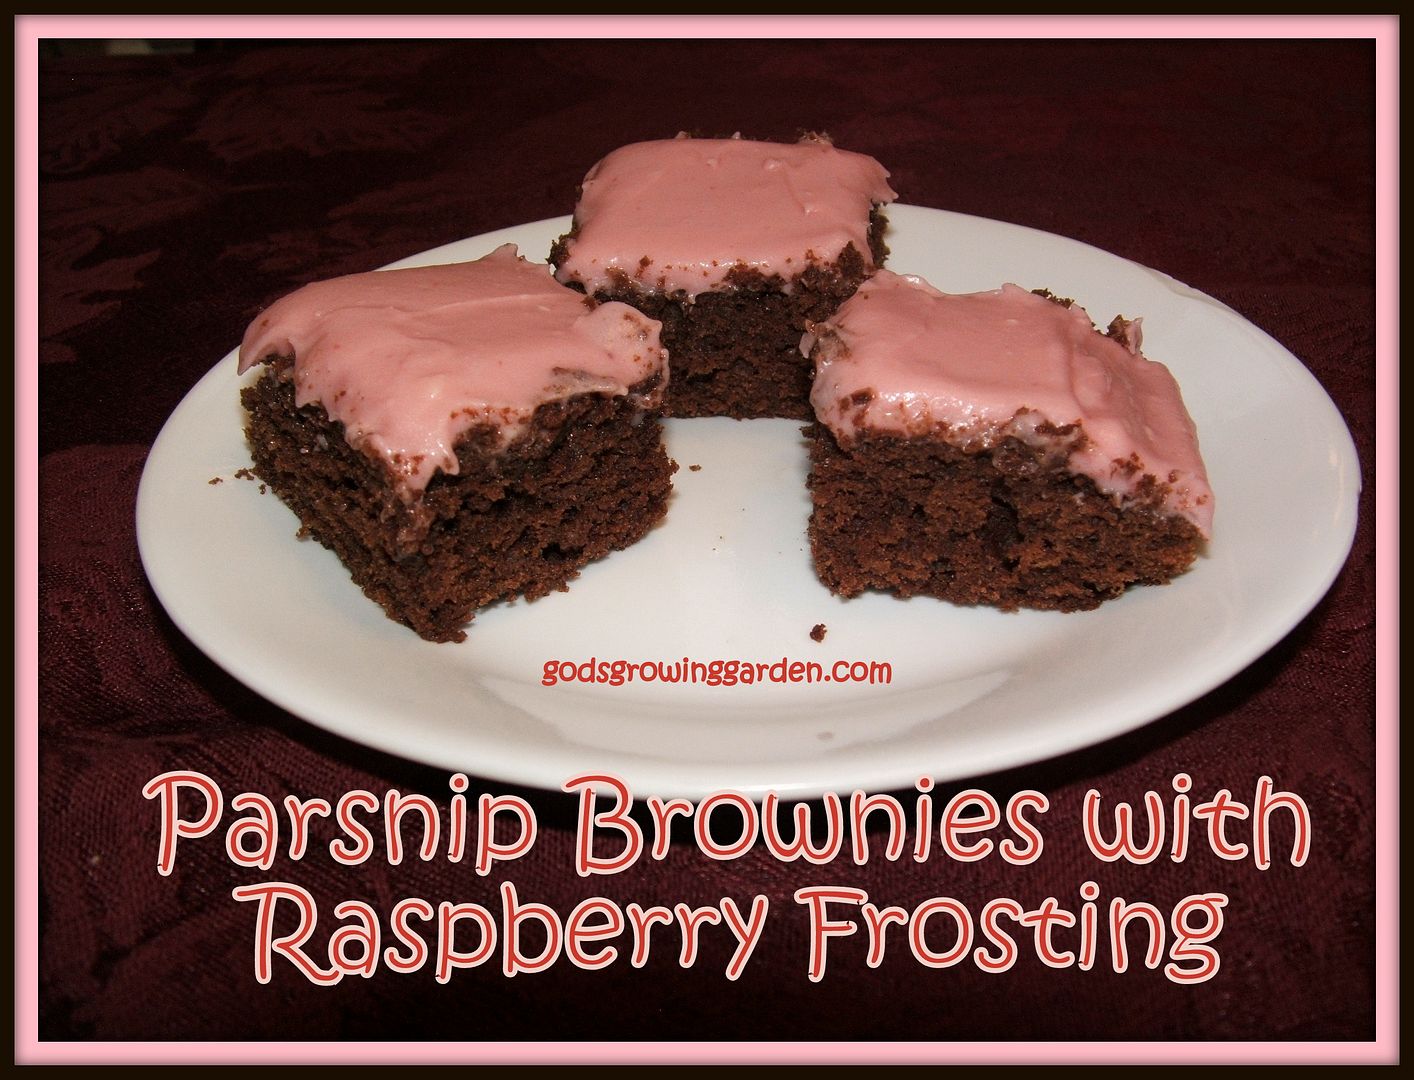 Parsnip Brownies with Rasp, by Angie Ouellette-Tower for godsgrowinggarden.com